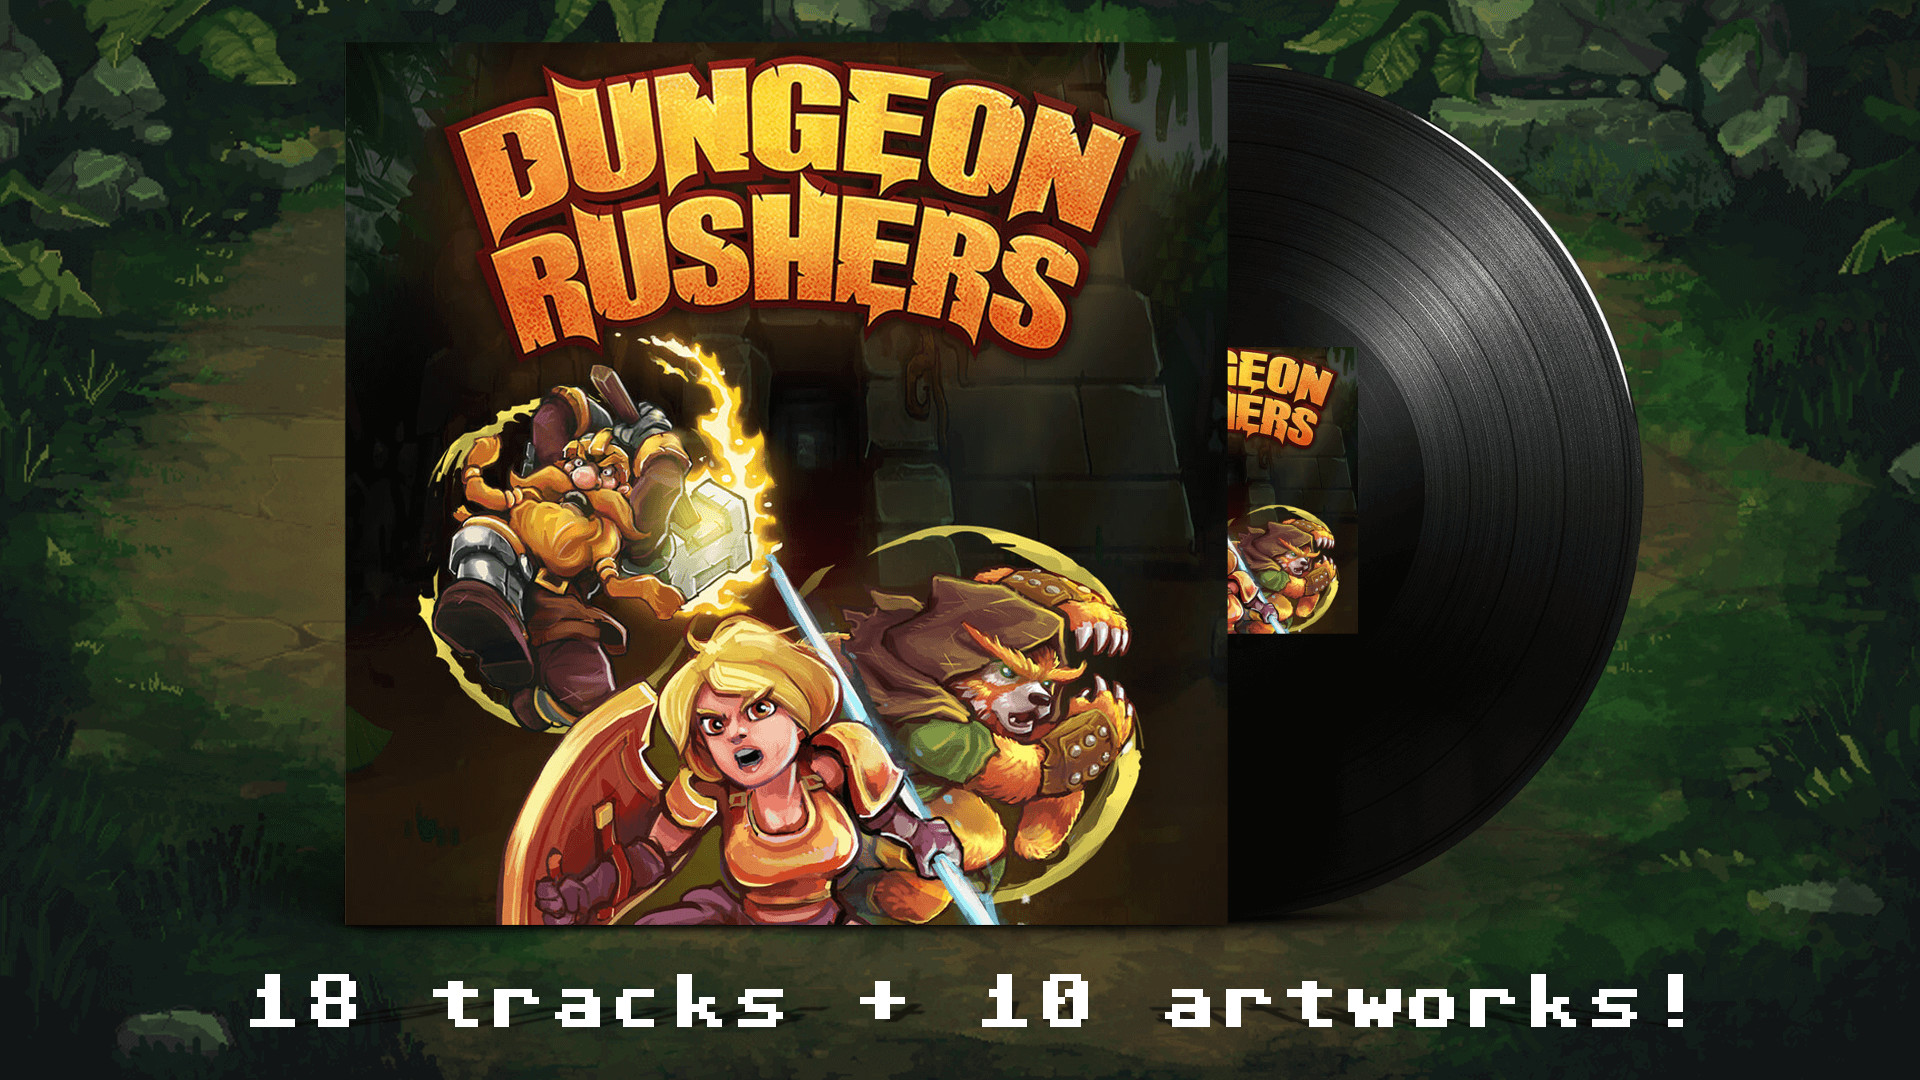 Dungeon Rushers - Soundtrack and wallpapers screenshot